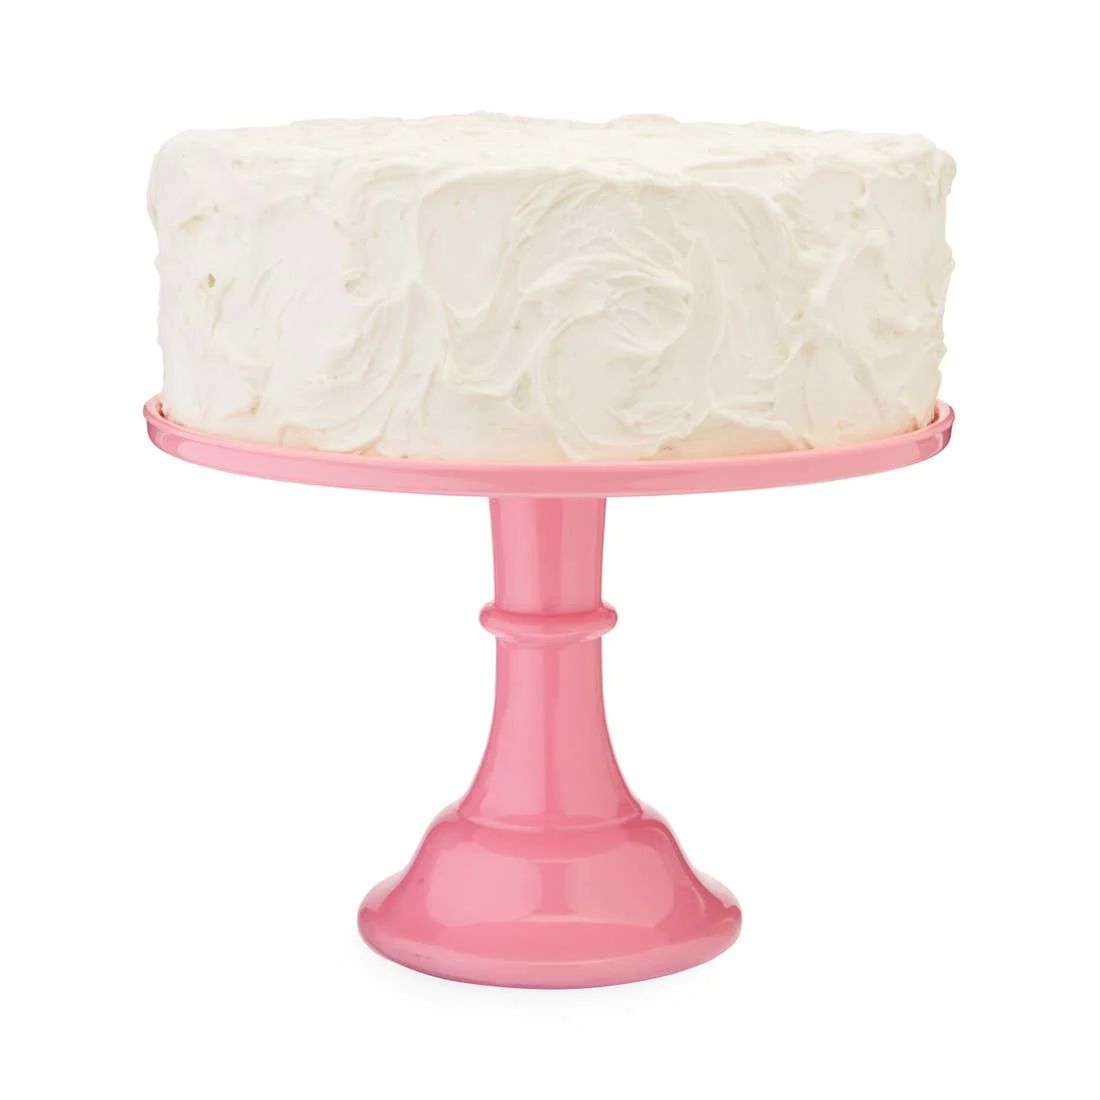 Pink Melamine Cake Stand | Ellie and Piper